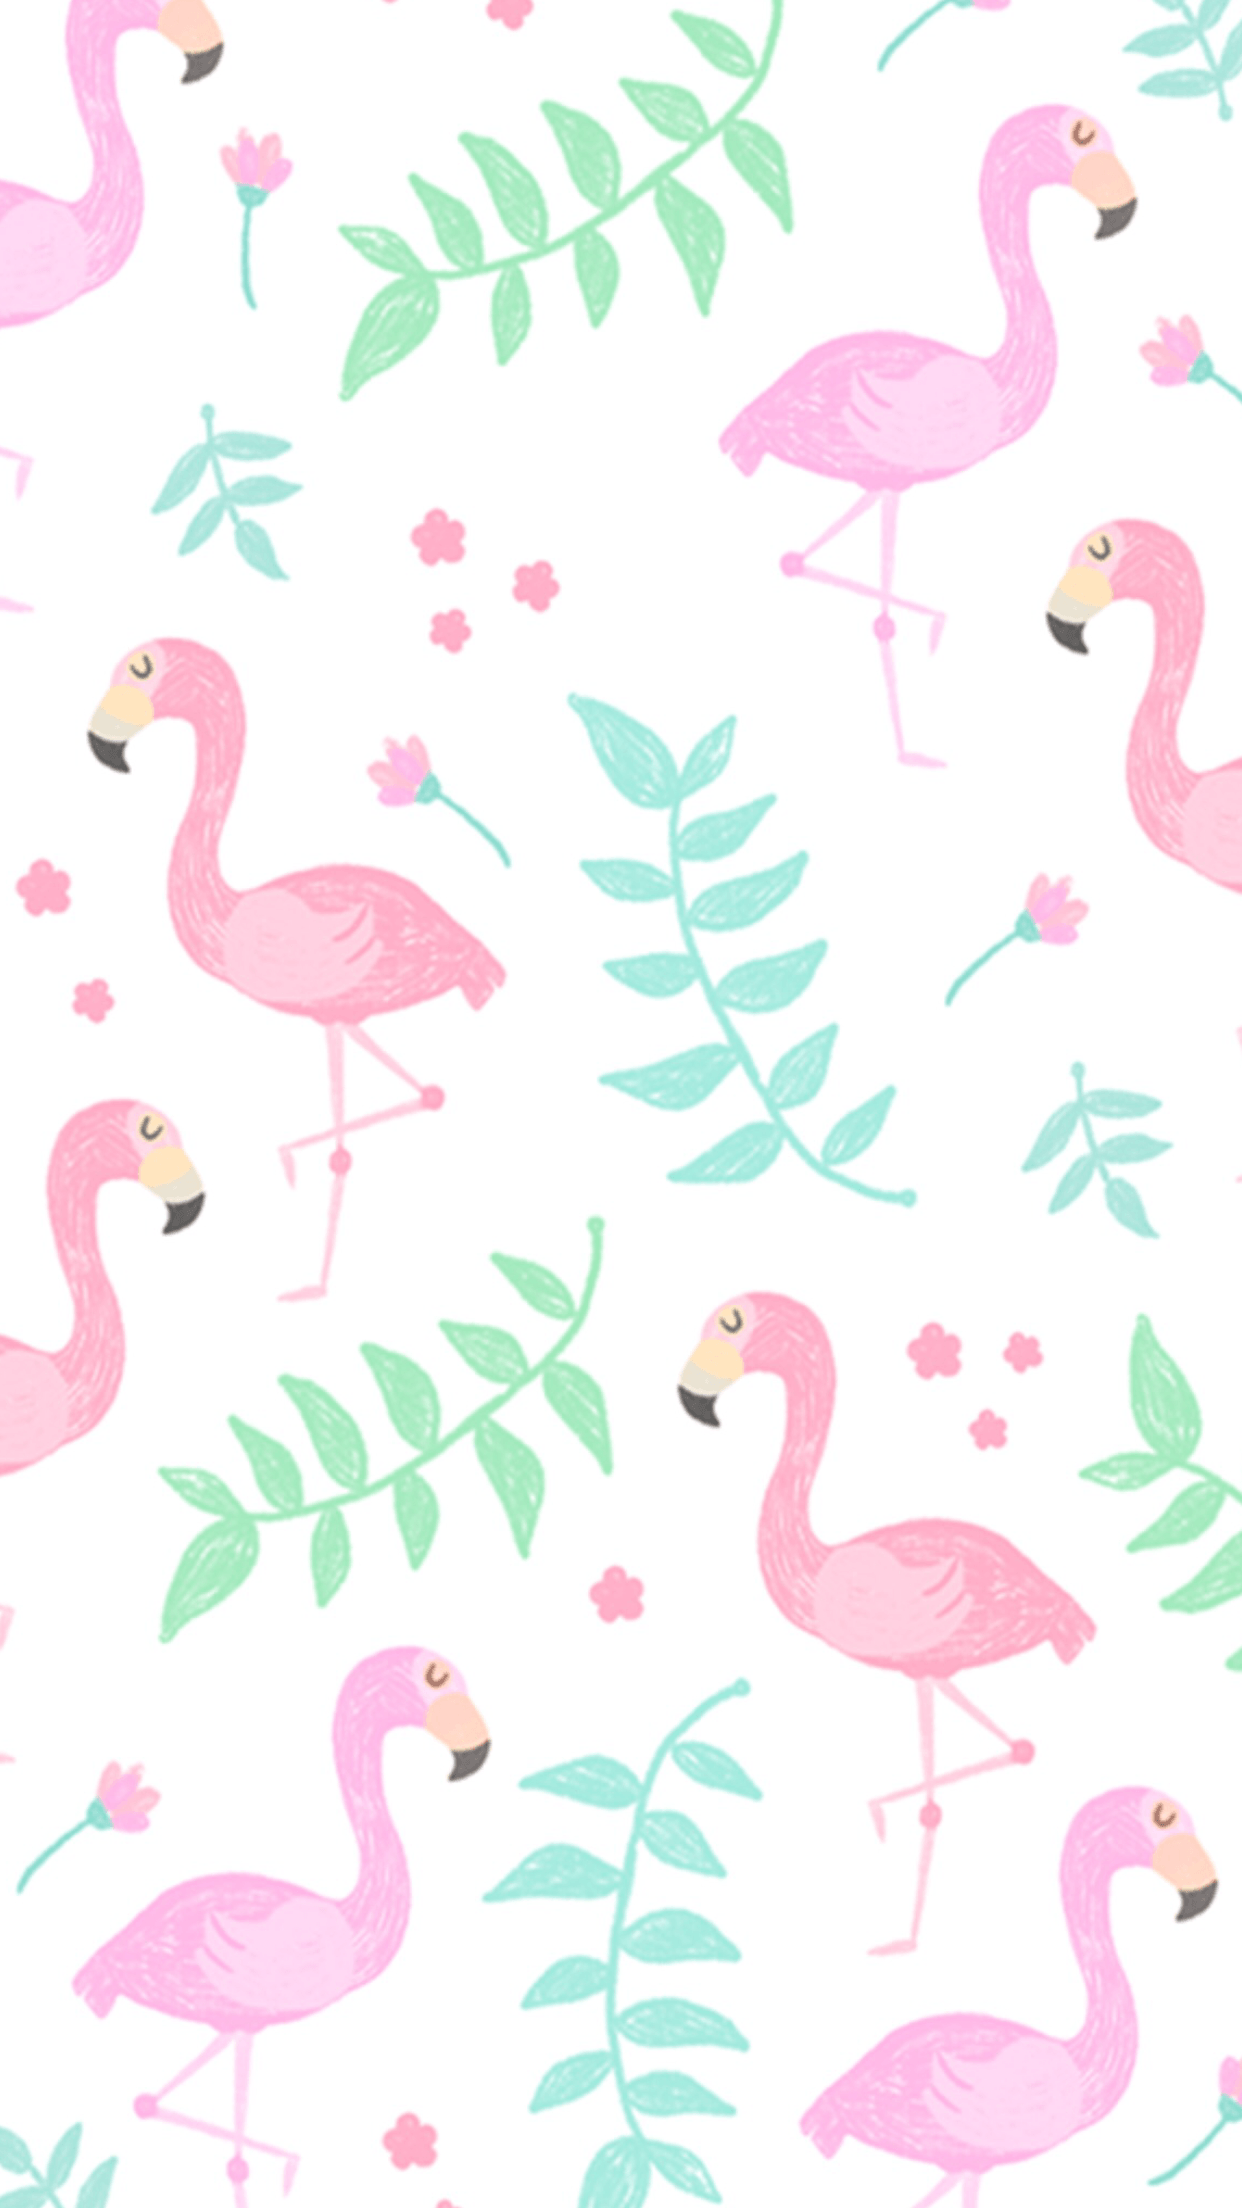 Cute flamingo background Royalty Free Vector Image